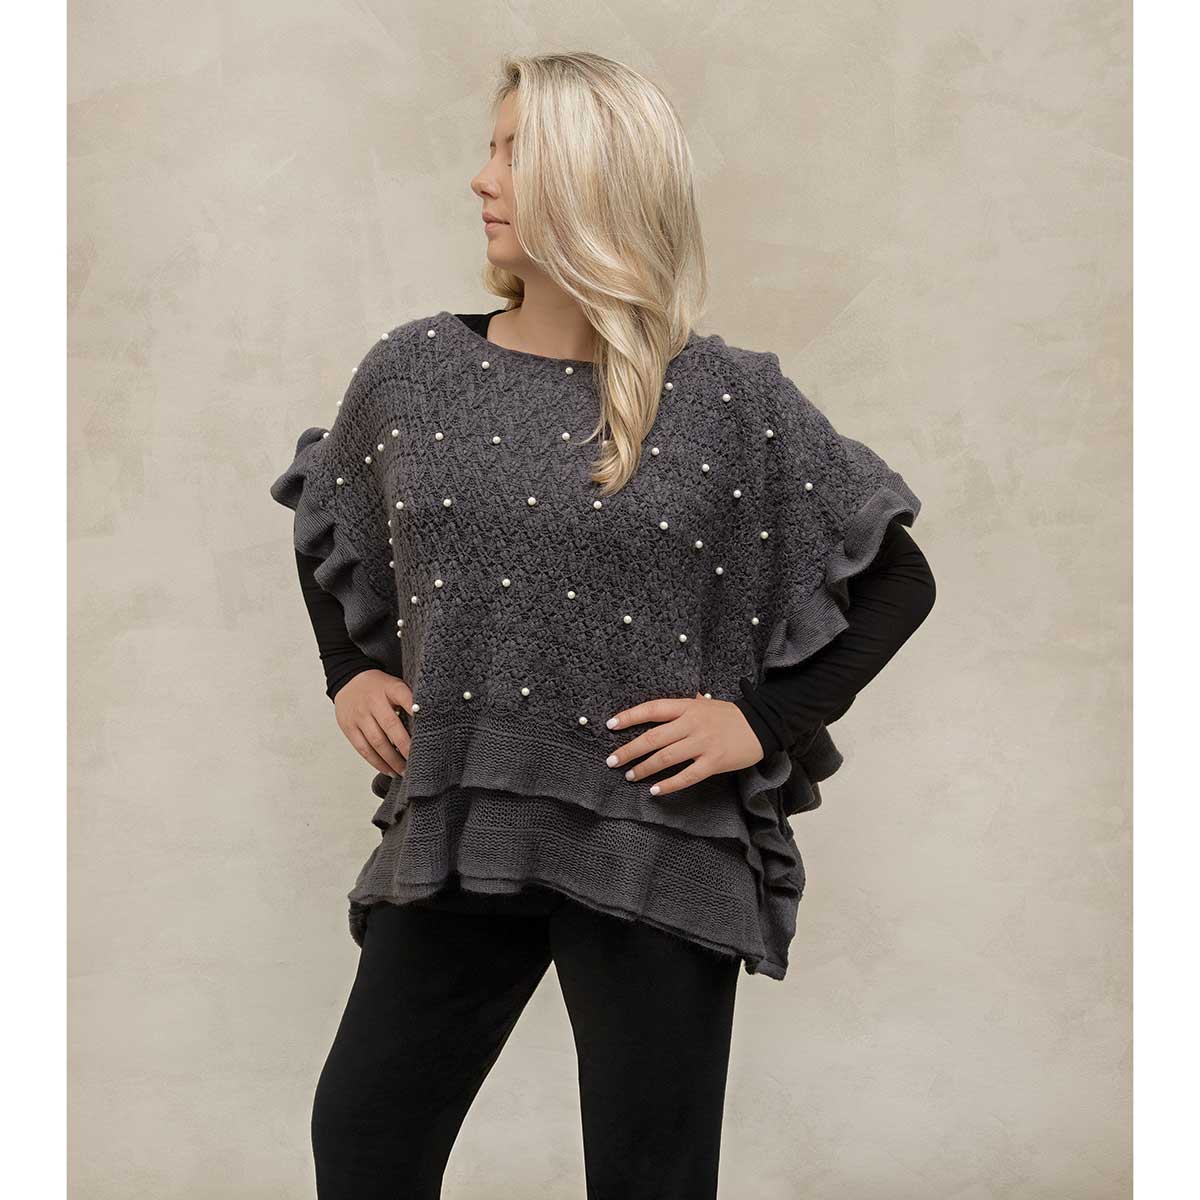 DARK GREY KNIT PONCHO WITH PEARLS 20"X40" (ONE SIZE FITS MOST)